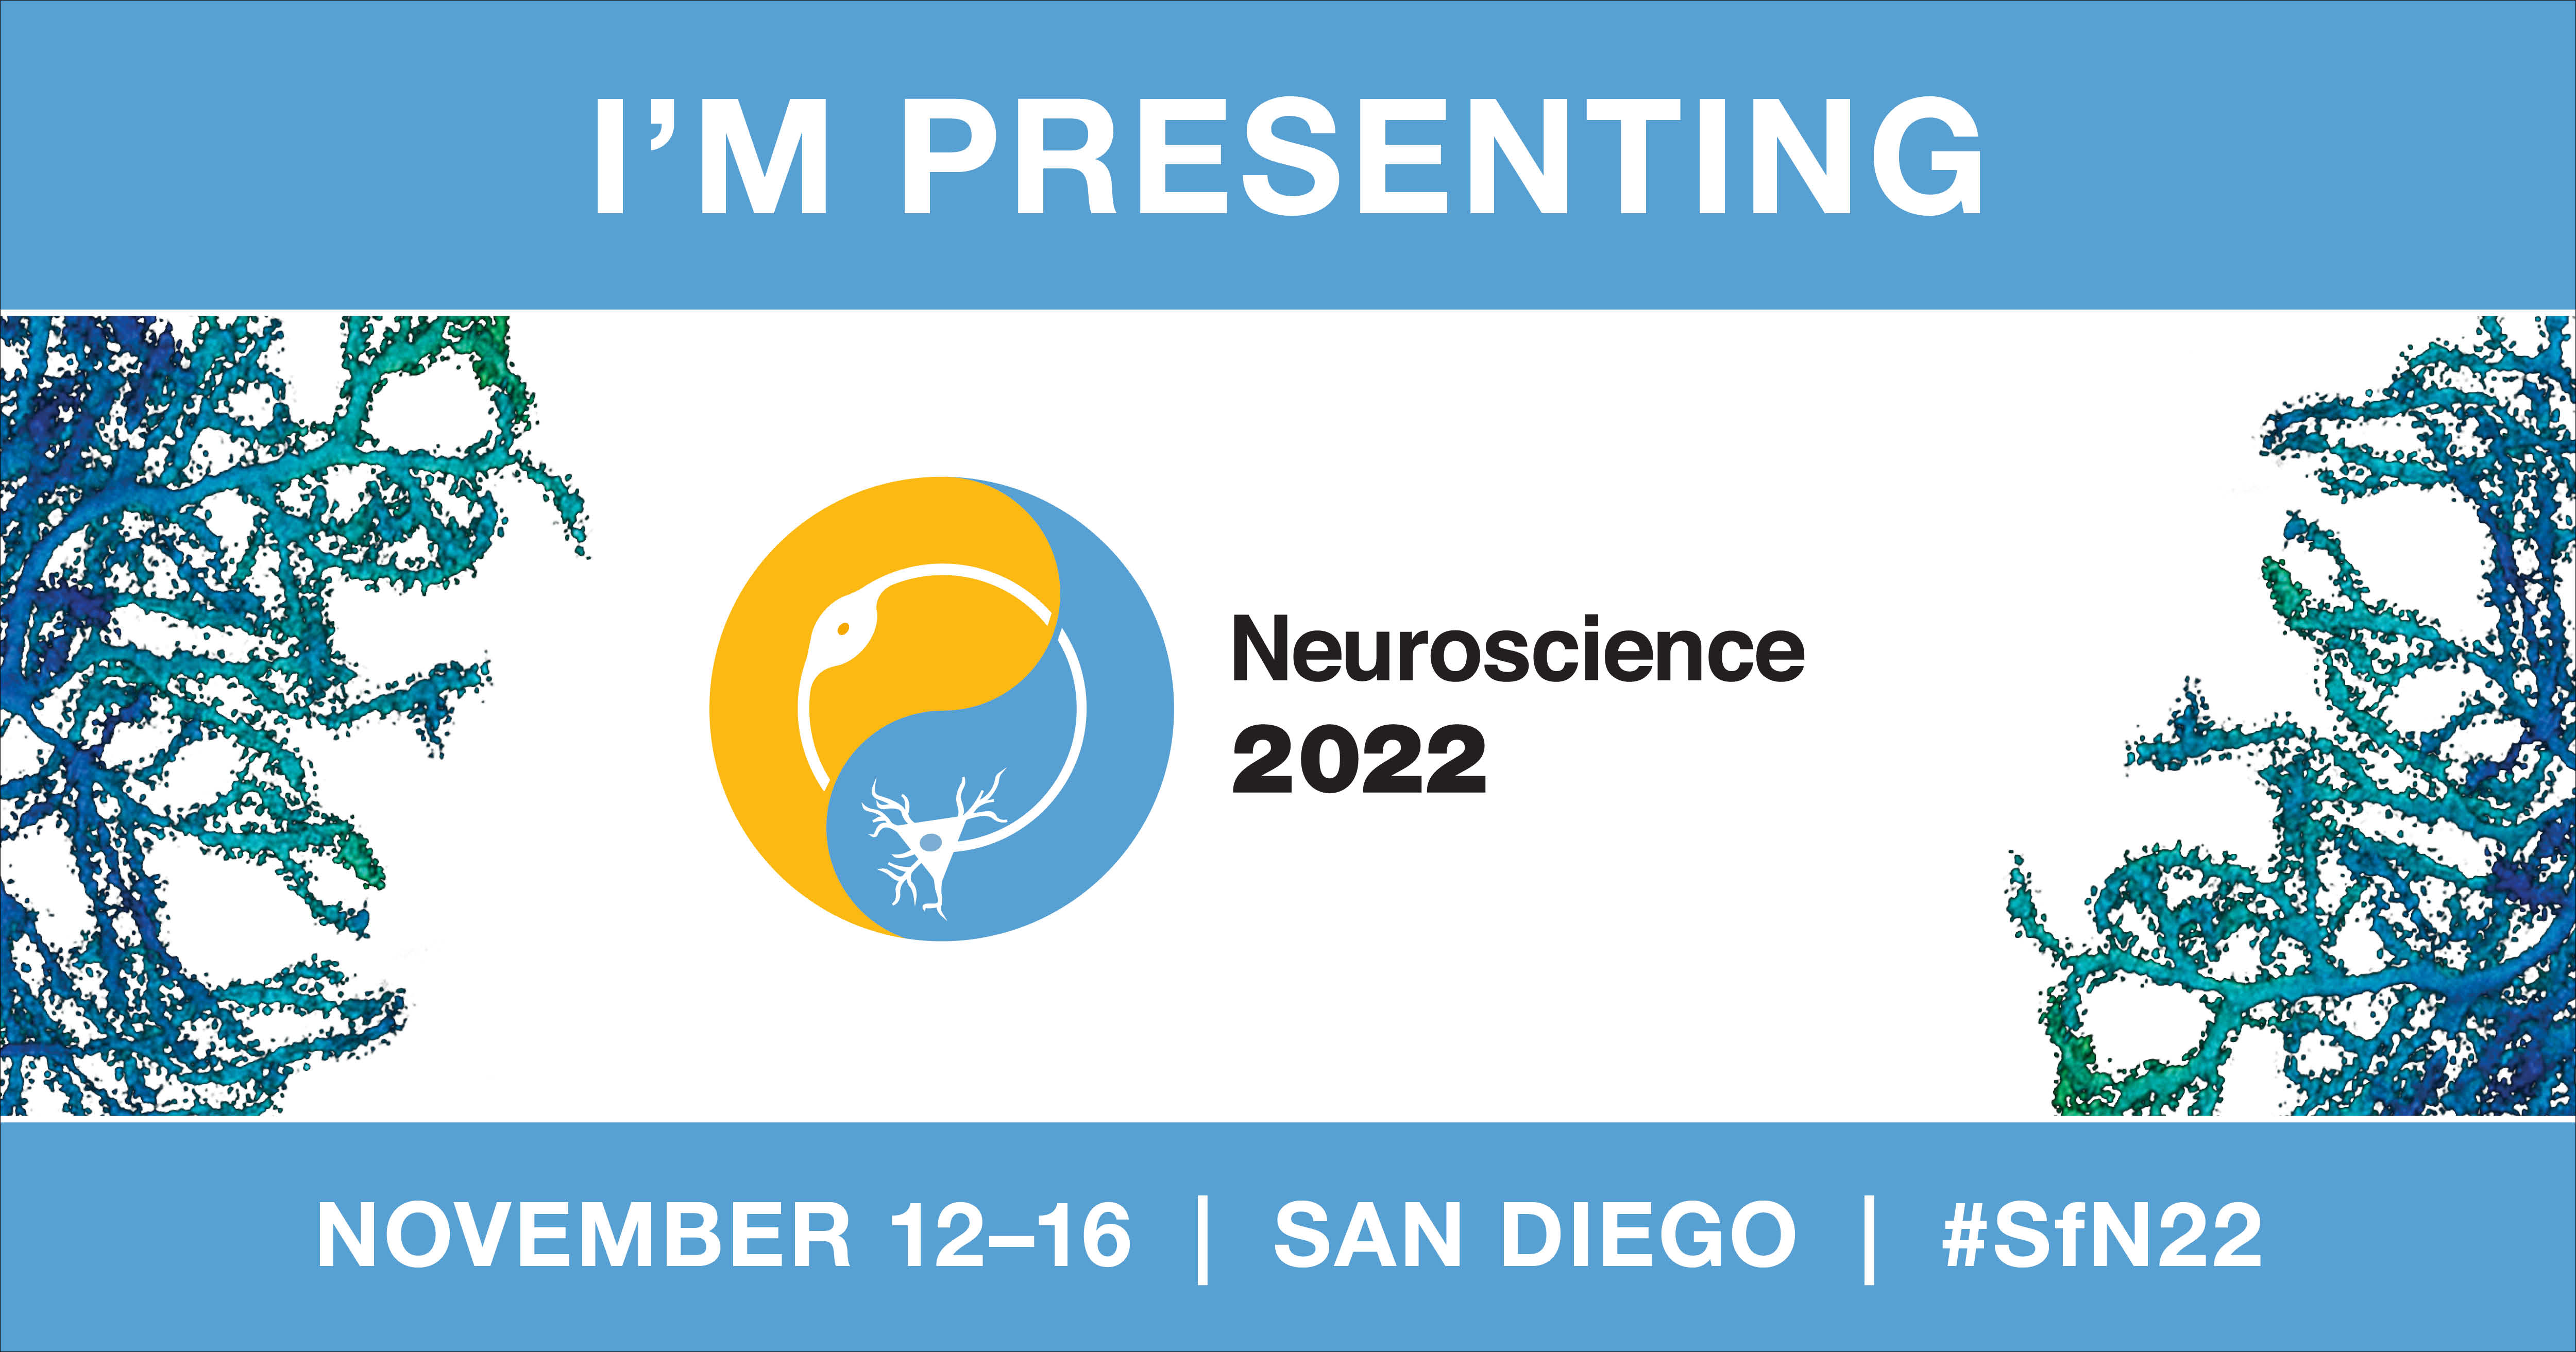 Image that says "I'm Presenting" with the Neuroscience 2022 logo below the text.